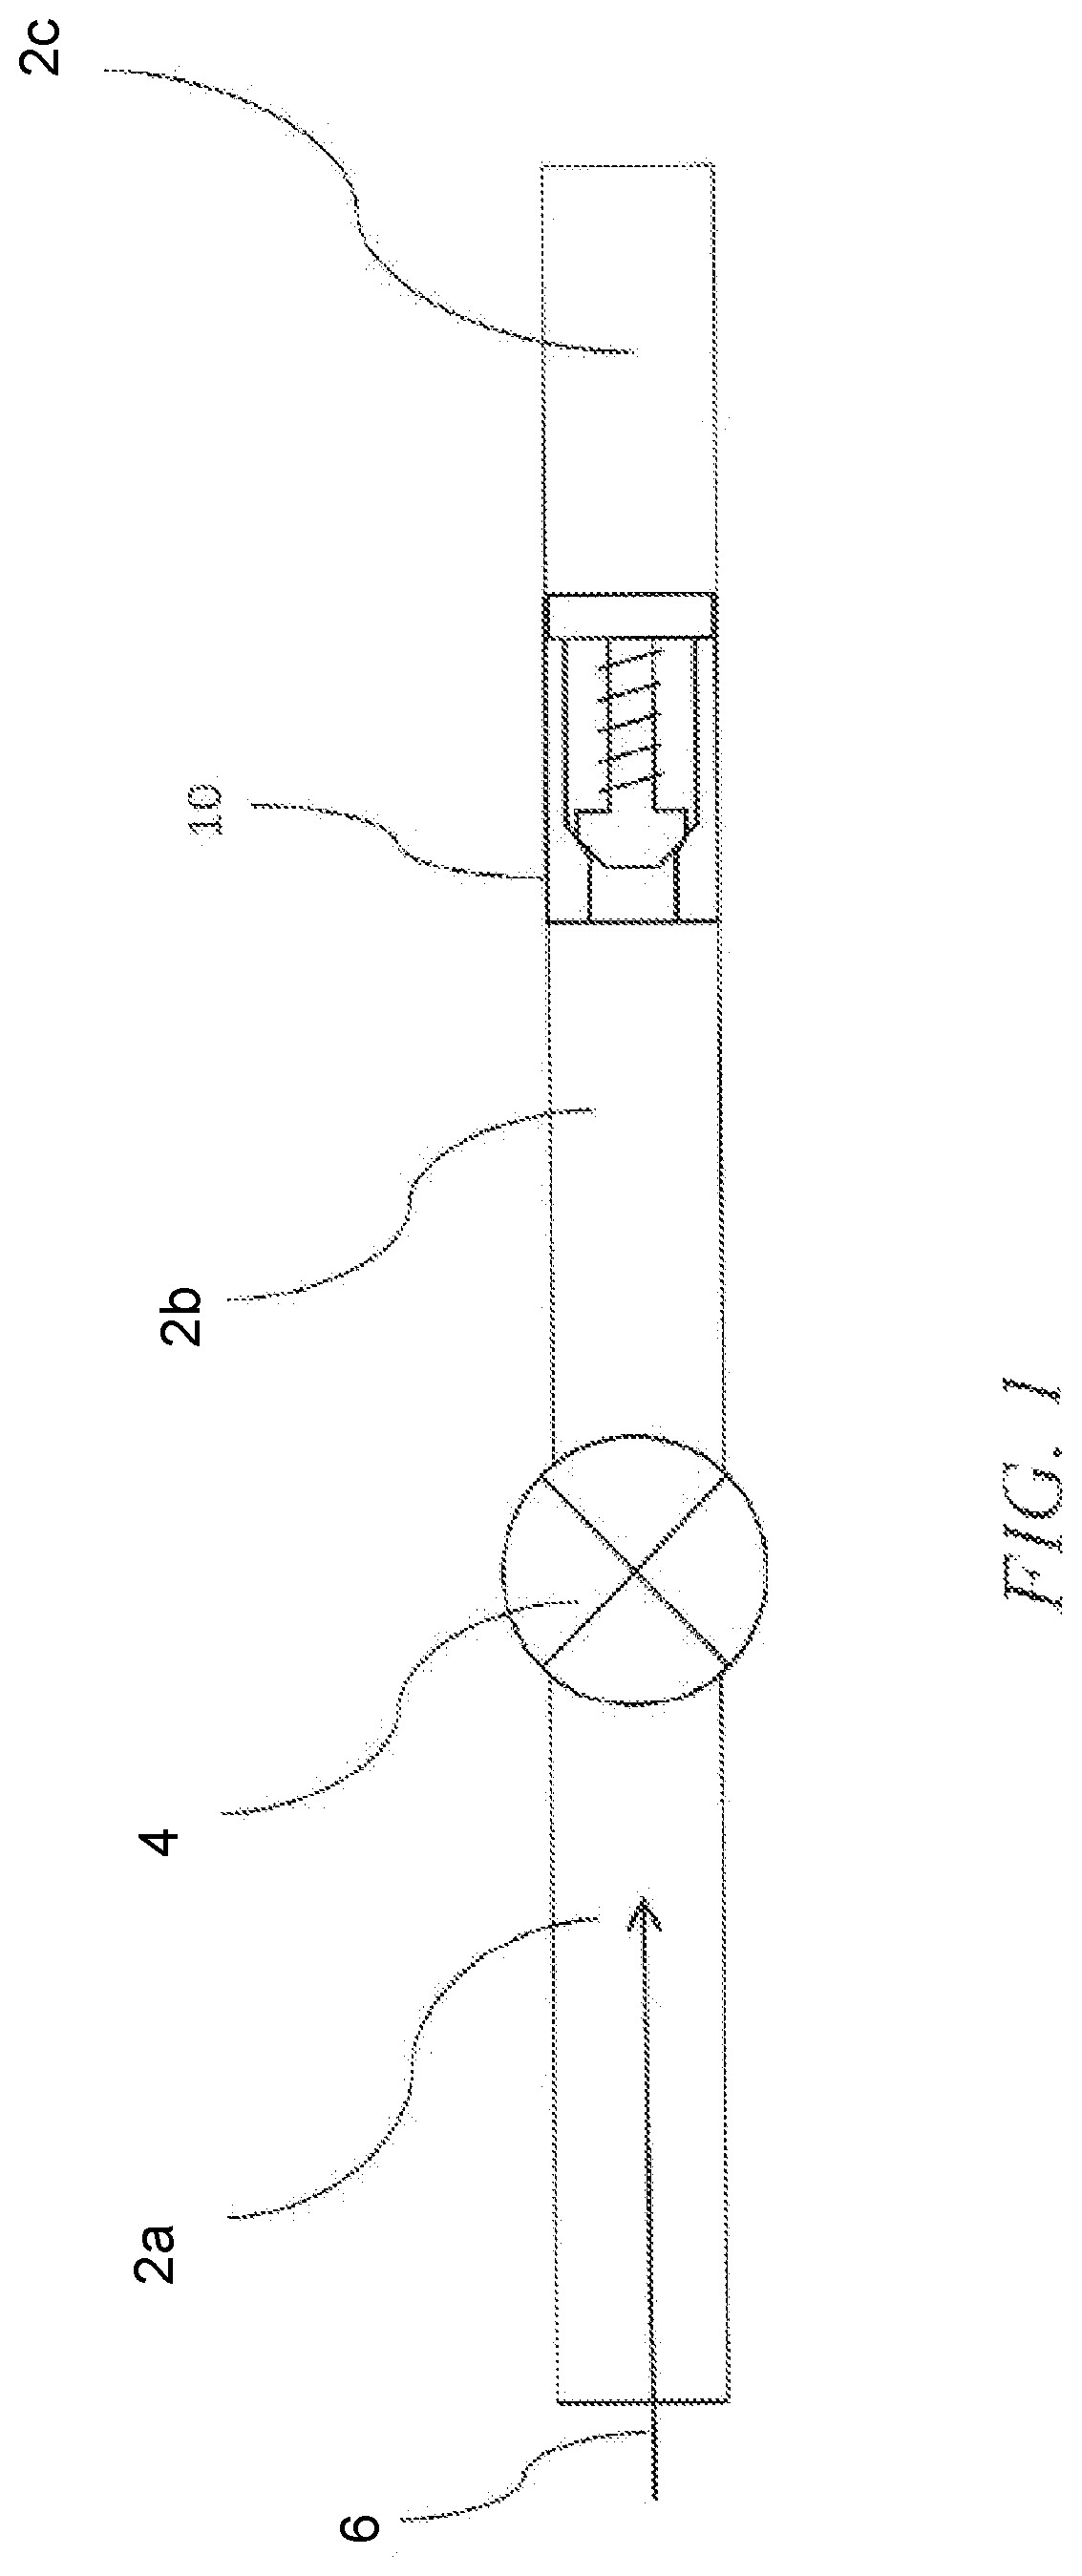 Apparatus, systems and methods for managing fluids comprising a two-stage poppet valve